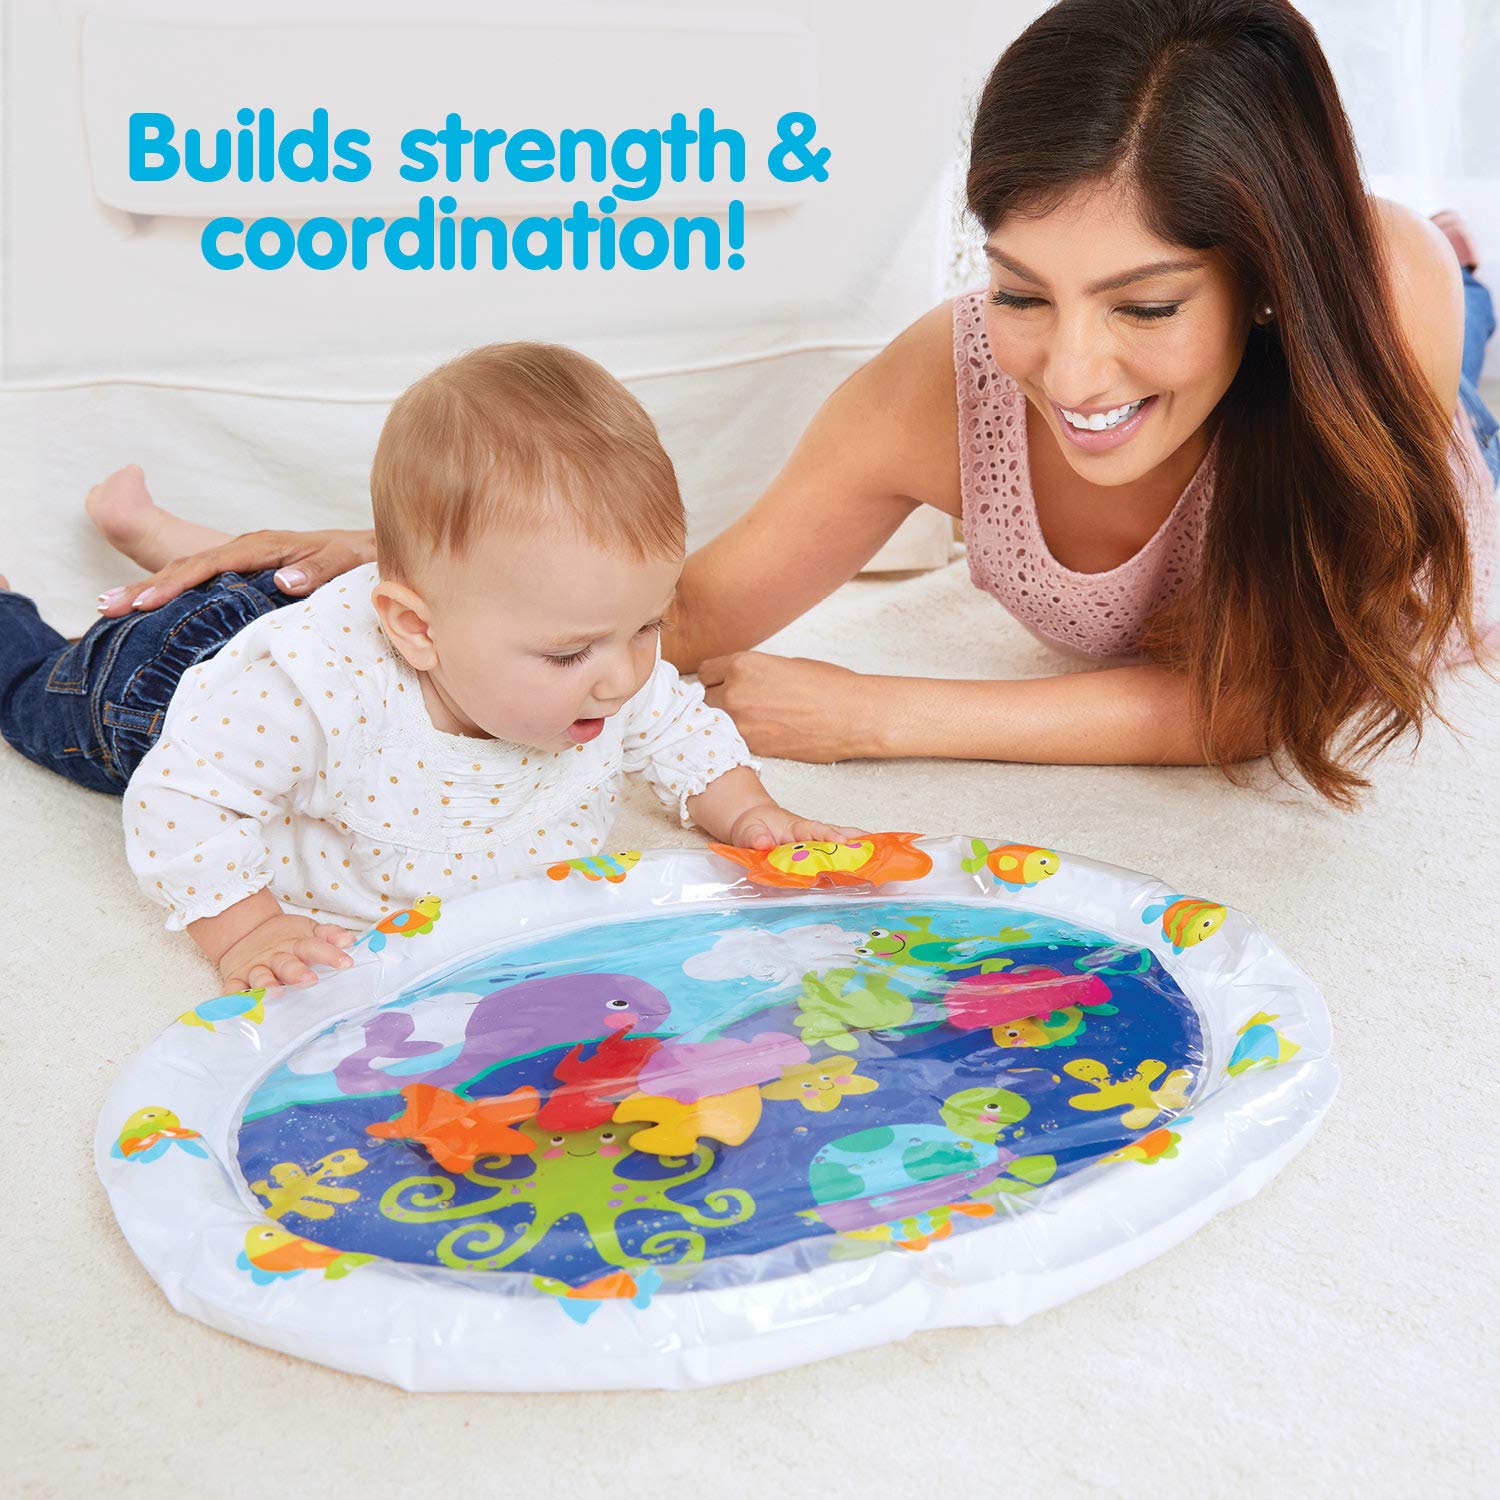 Kidoozie Pat 'n Laugh Water Mat for Infants and Toddlers Ages 3-18 Months; Encourage Tummy Time with 6 Fun Floating Sea Friends to Discover